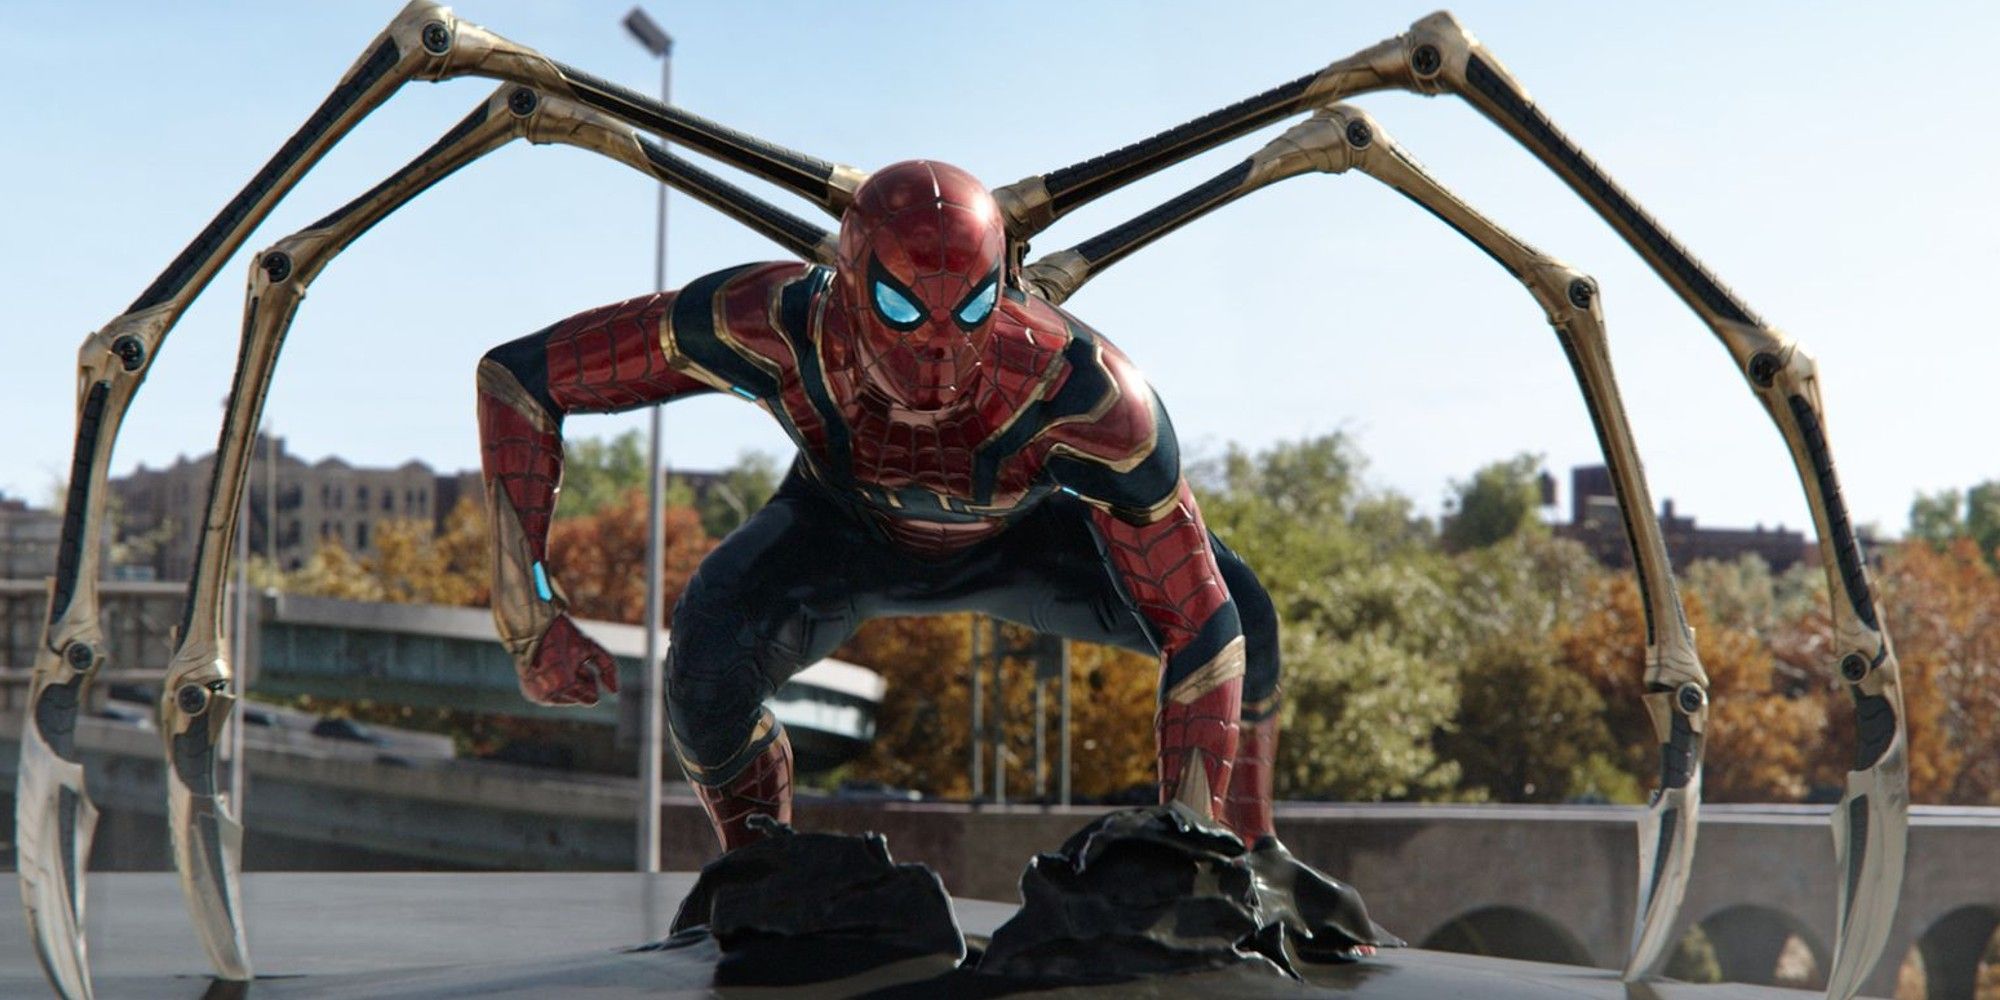 SpiderMan No Way Home Has 3rd Biggest Box Office Opening in History [UPDATED]